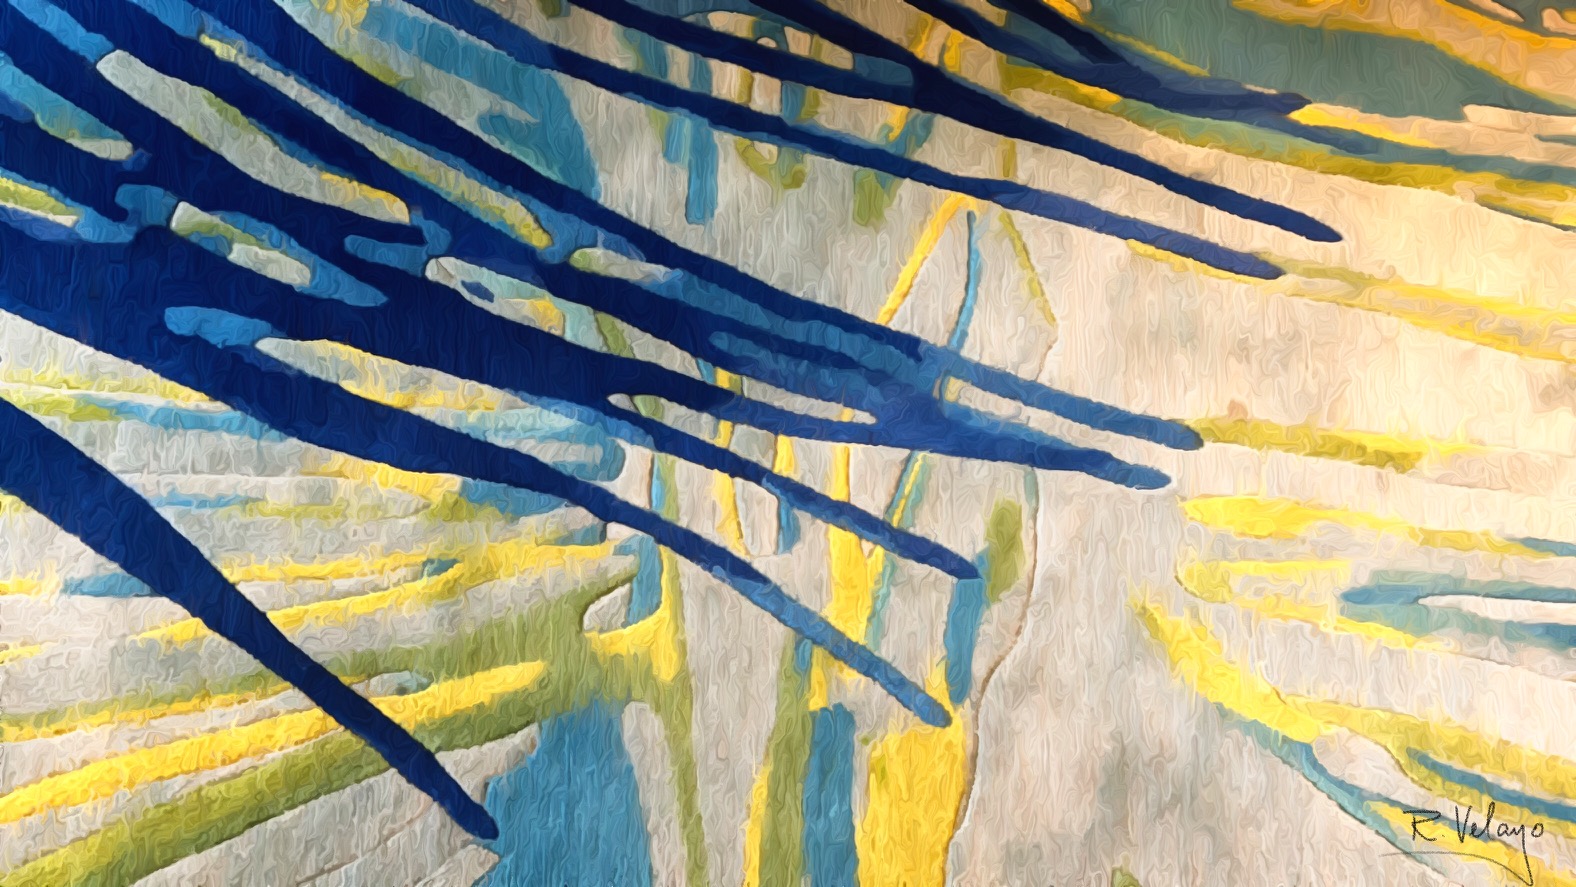 "BLUE AND YELLOW WATERCOLOR STREAKS" [Created: 12/14/2021]